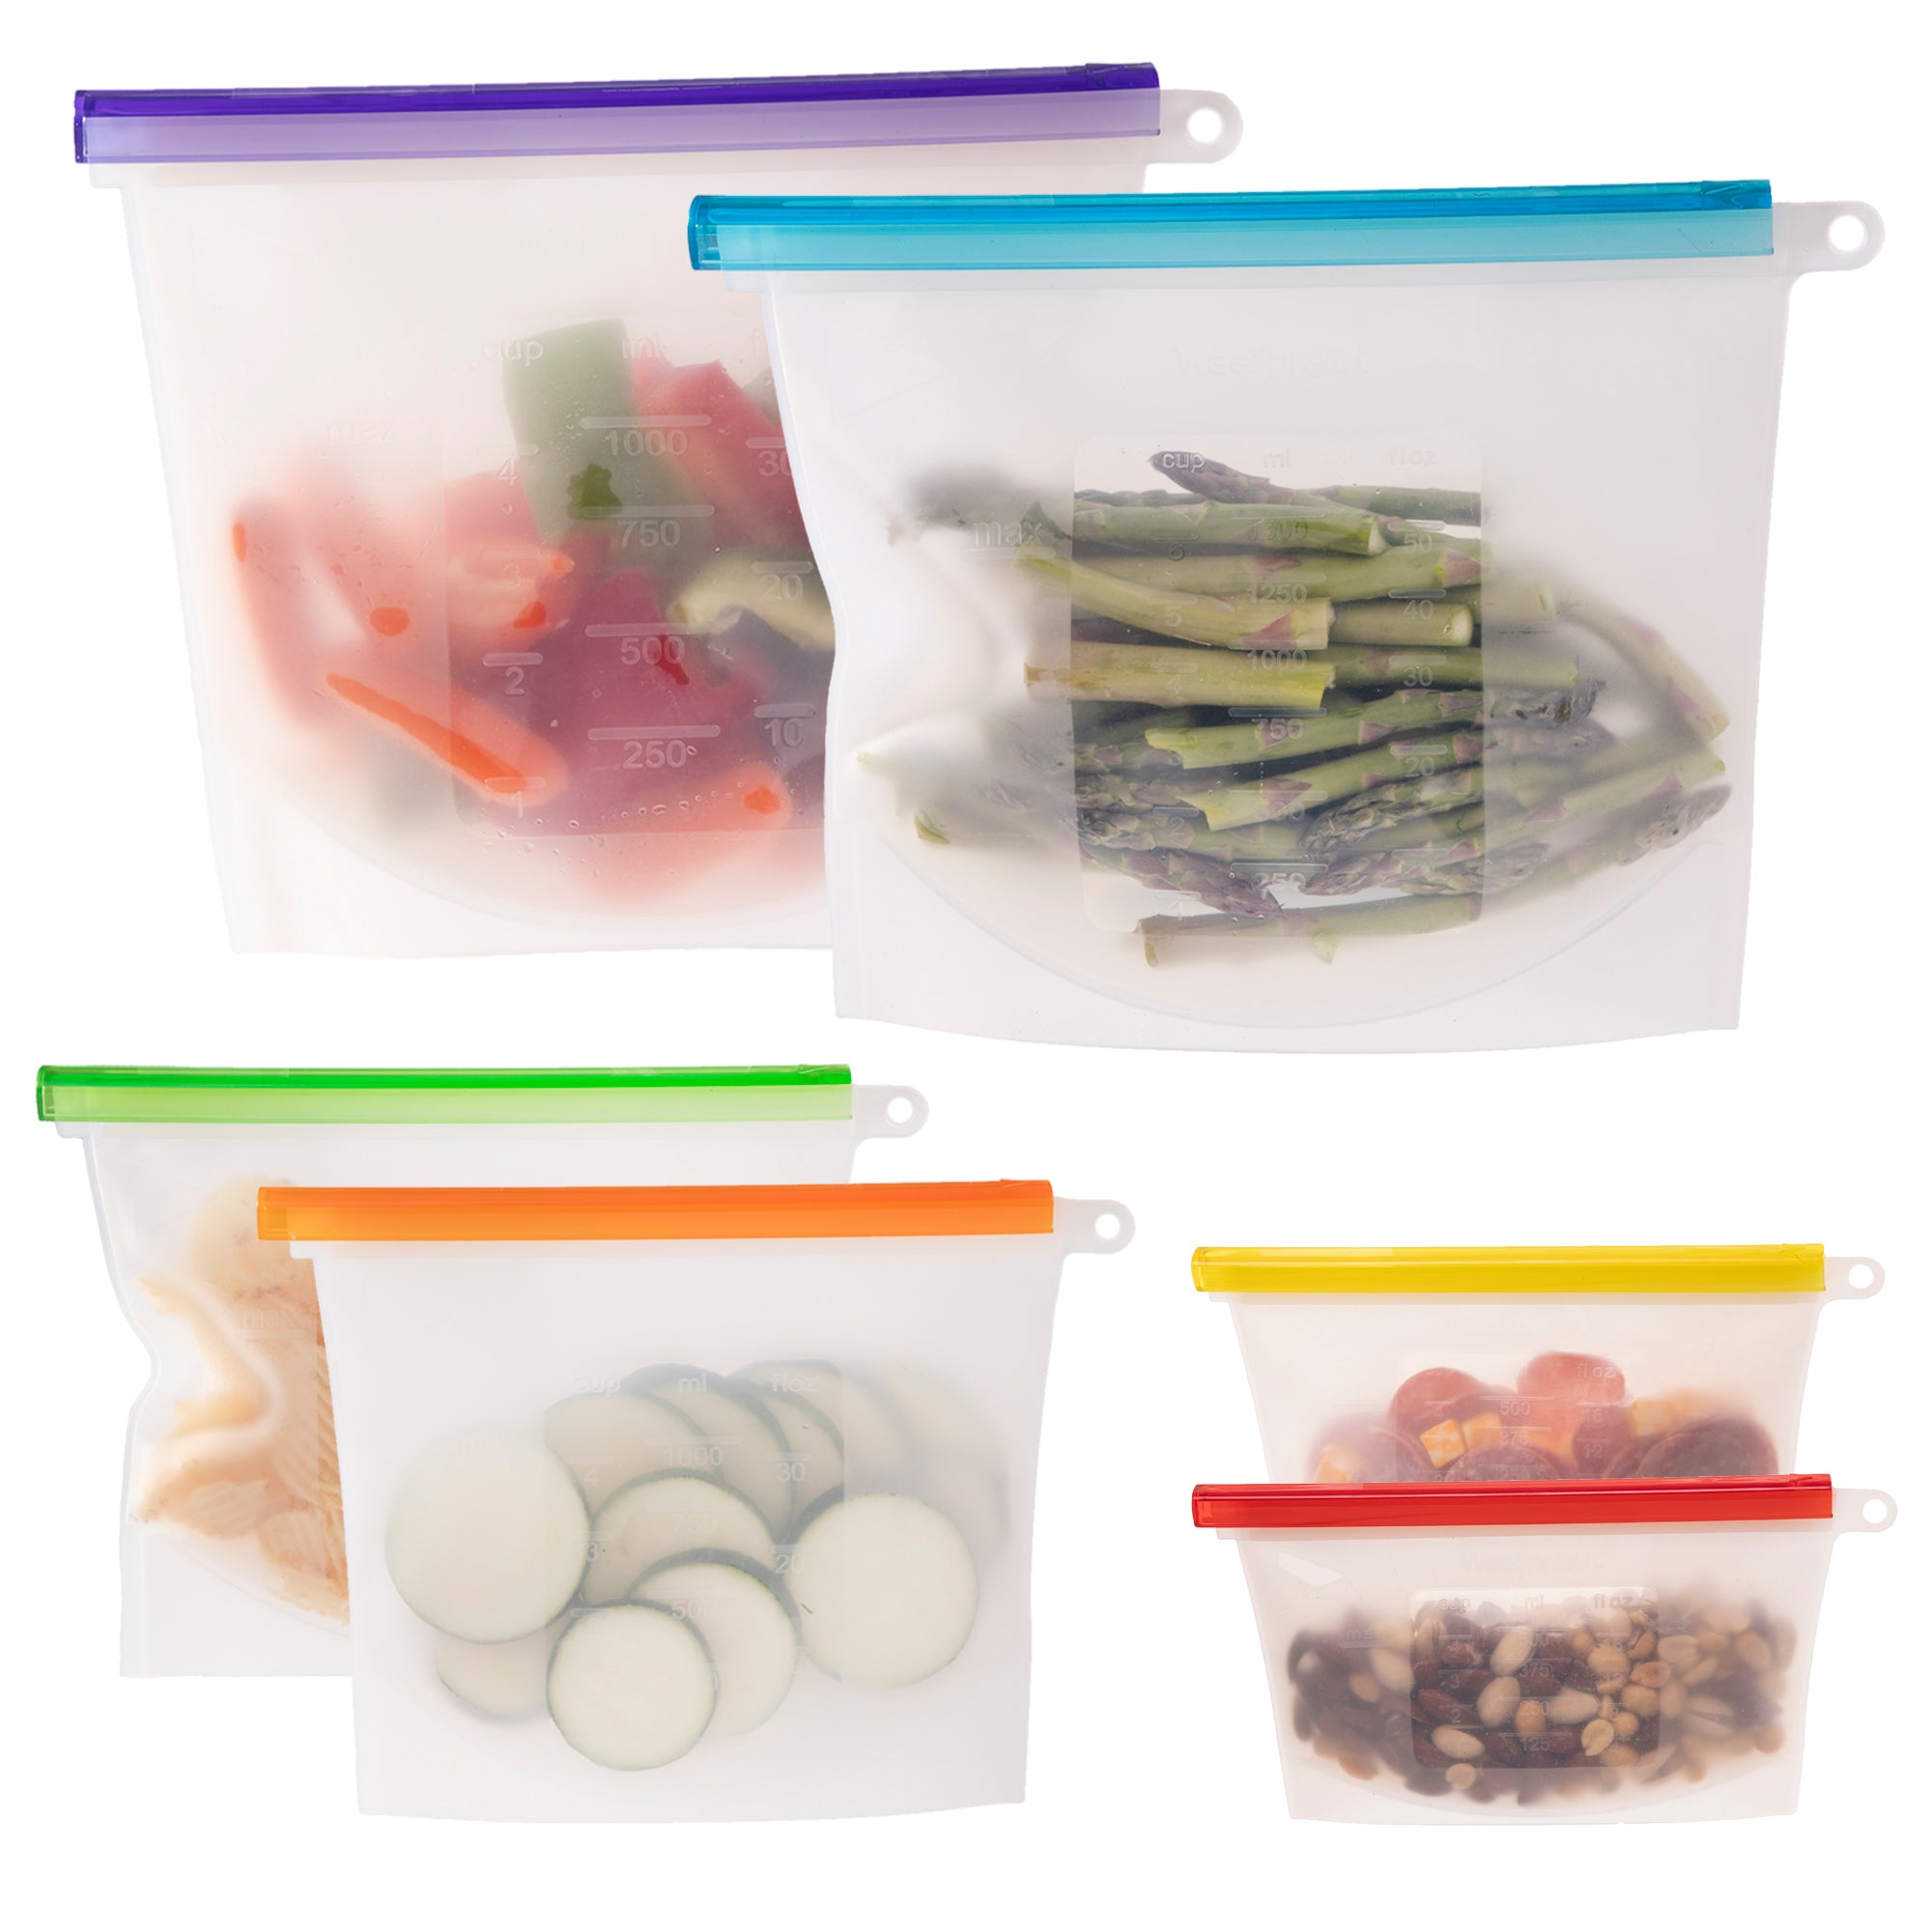 Reusable Silicone Food Storage Bags,stand Up Leakproof Zip Containers,reusable  Sandwich Bags,non-toxic,bpa Free, Dishwasher Safe,freezer-safe,easy To